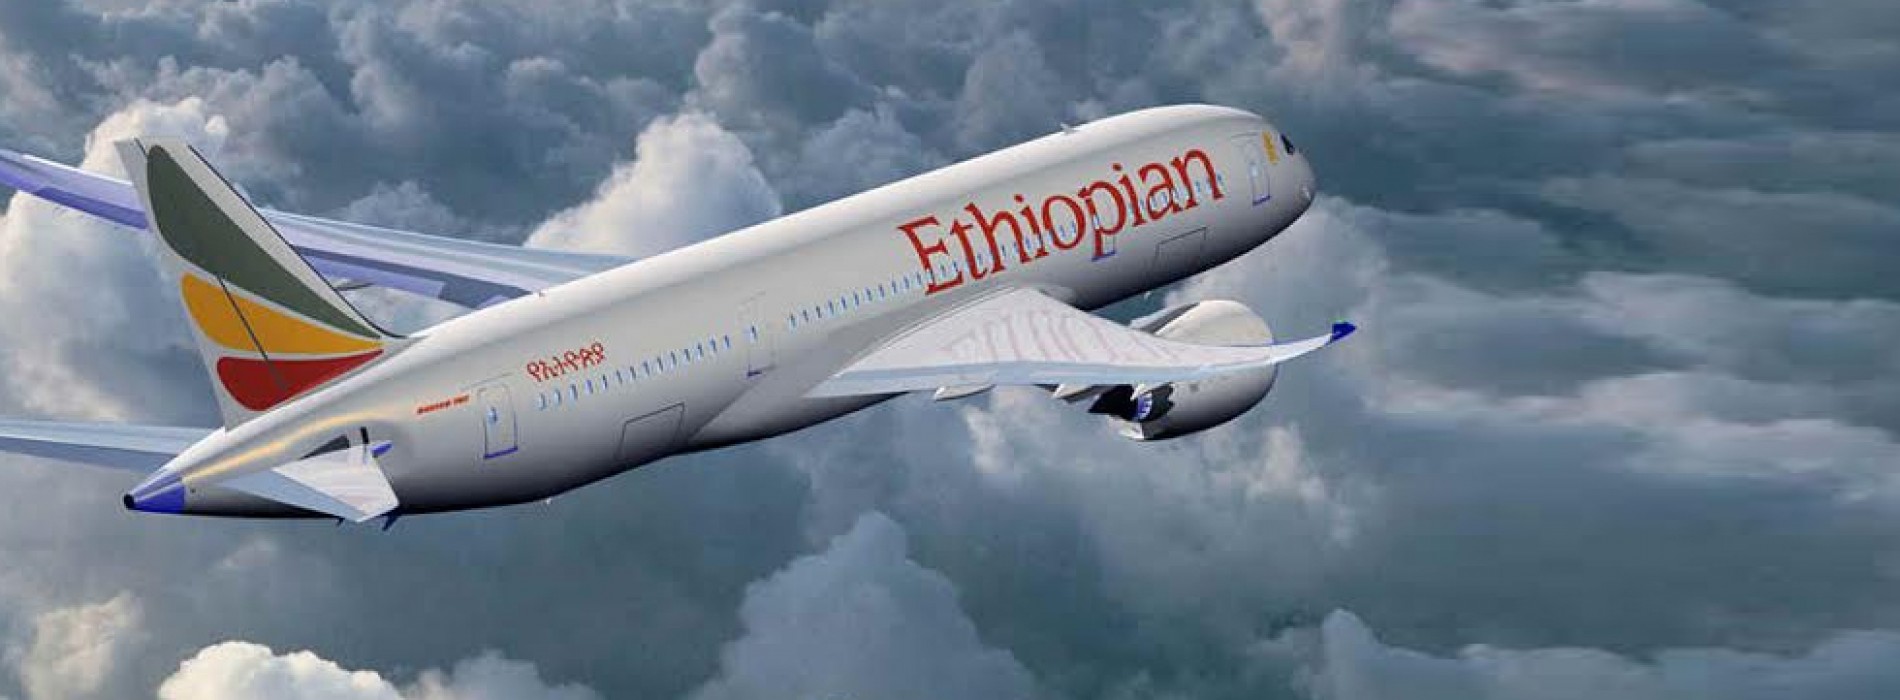 Ethiopian to add flight frequency to Seychelles